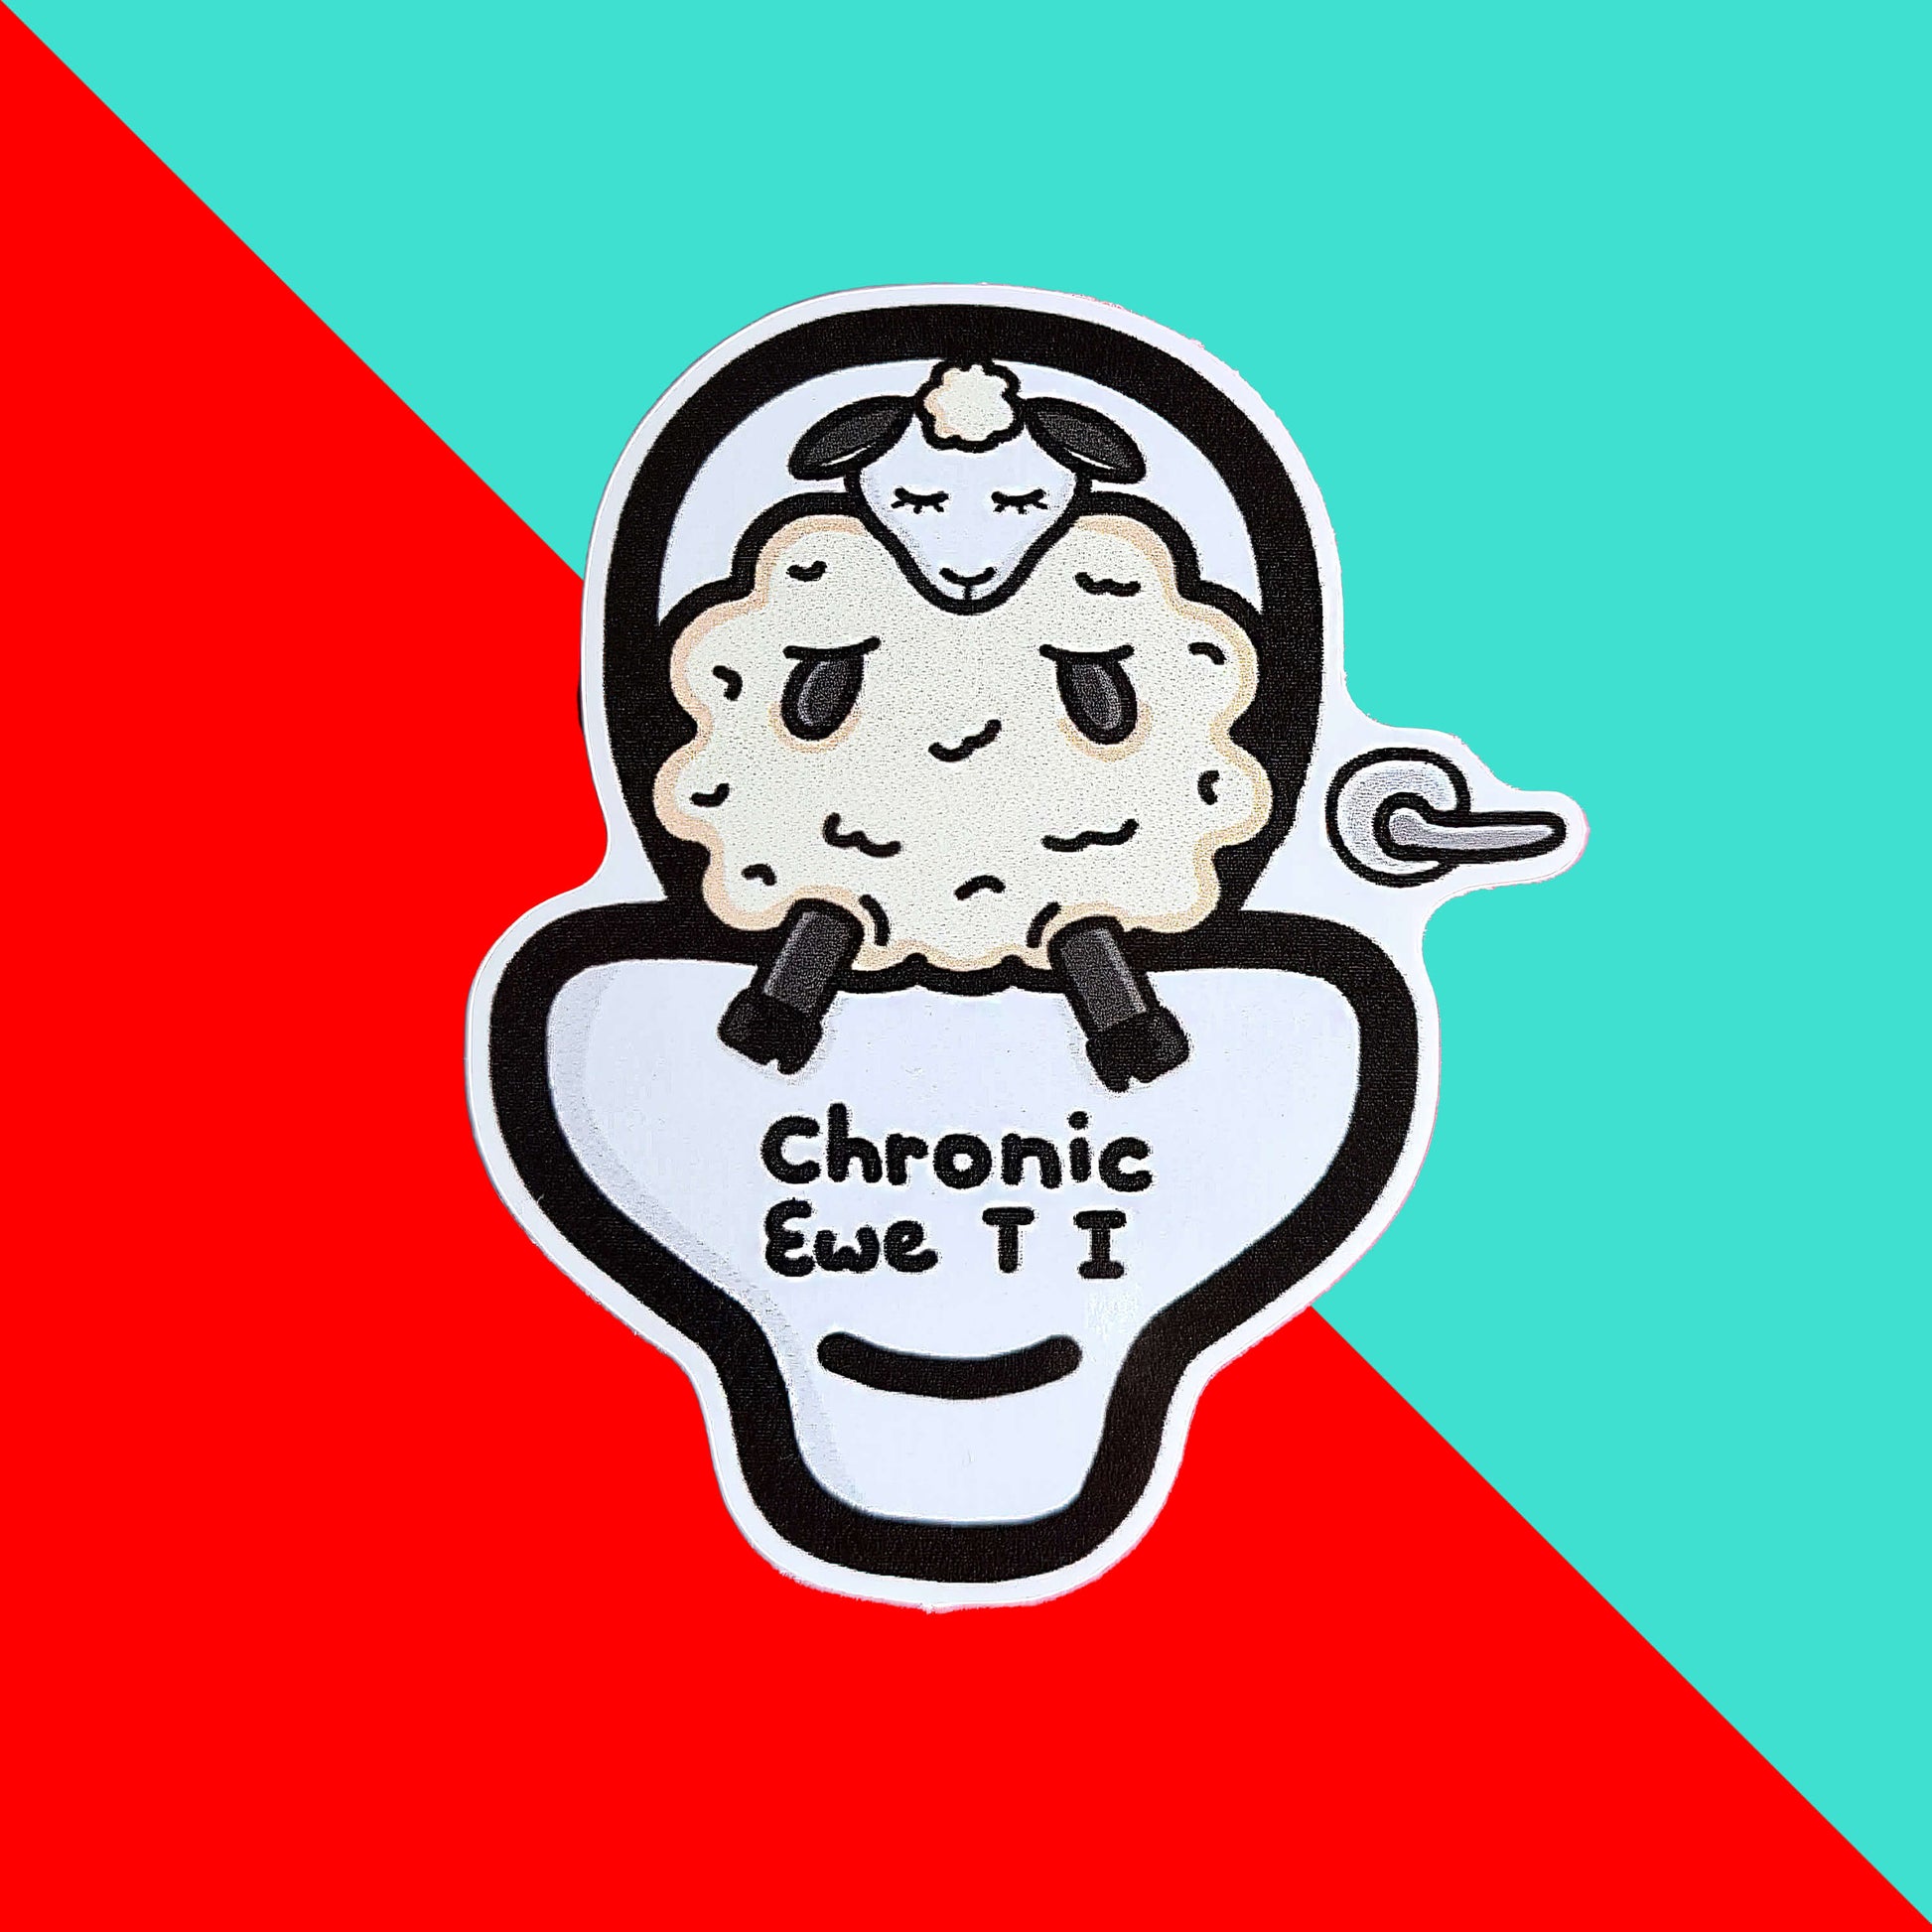 Chronic Ewe T I Sticker - Chronic UTI on a red & blue background. The sticker features a white sad sheep sat on a large white toilet with black text reading chronic ewe T I. The design is raising awareness for chronic utis.